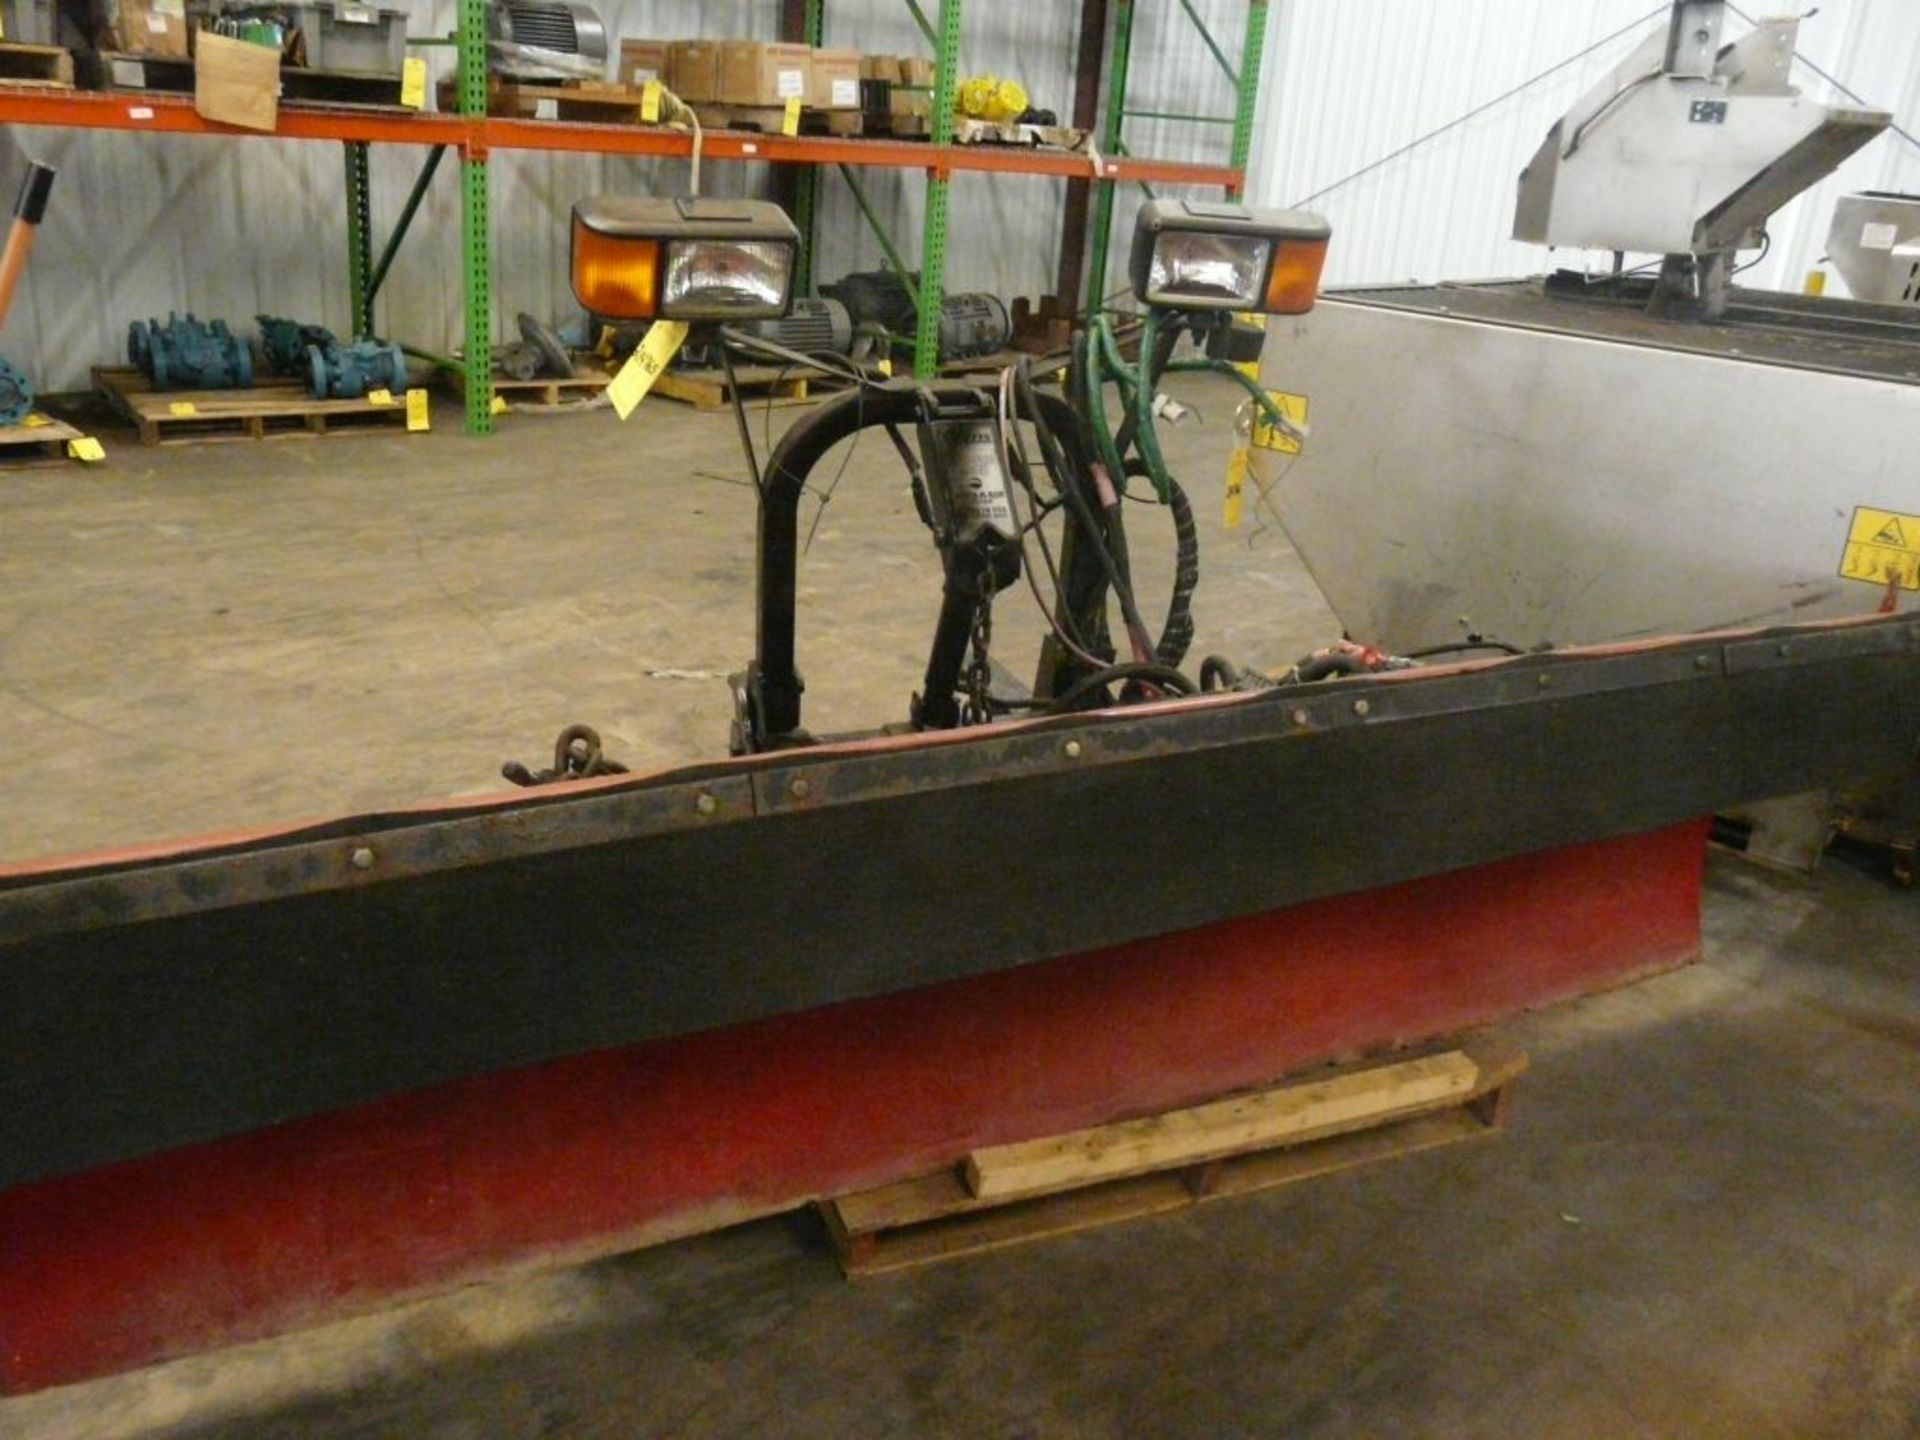 Curtis Hitch-N-Run Snow Plow - SNO-Pro 3000; Tag: 214765 - Image 4 of 5